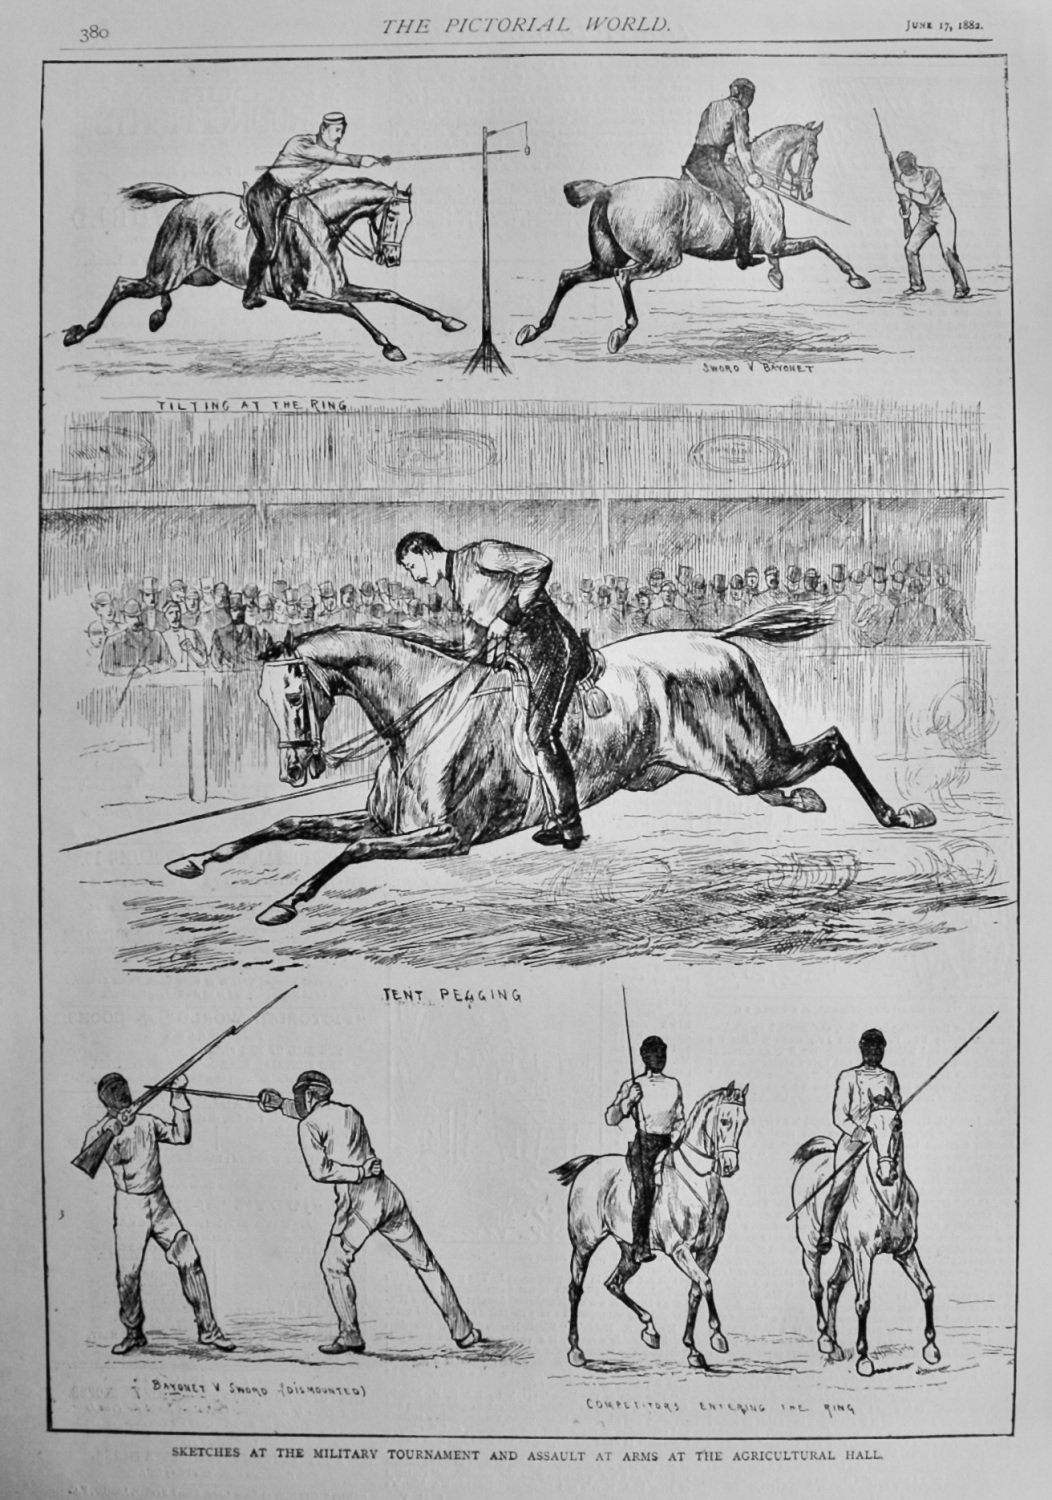 Sketches at the Military Tournament and Assault at Arms at the Agricultural